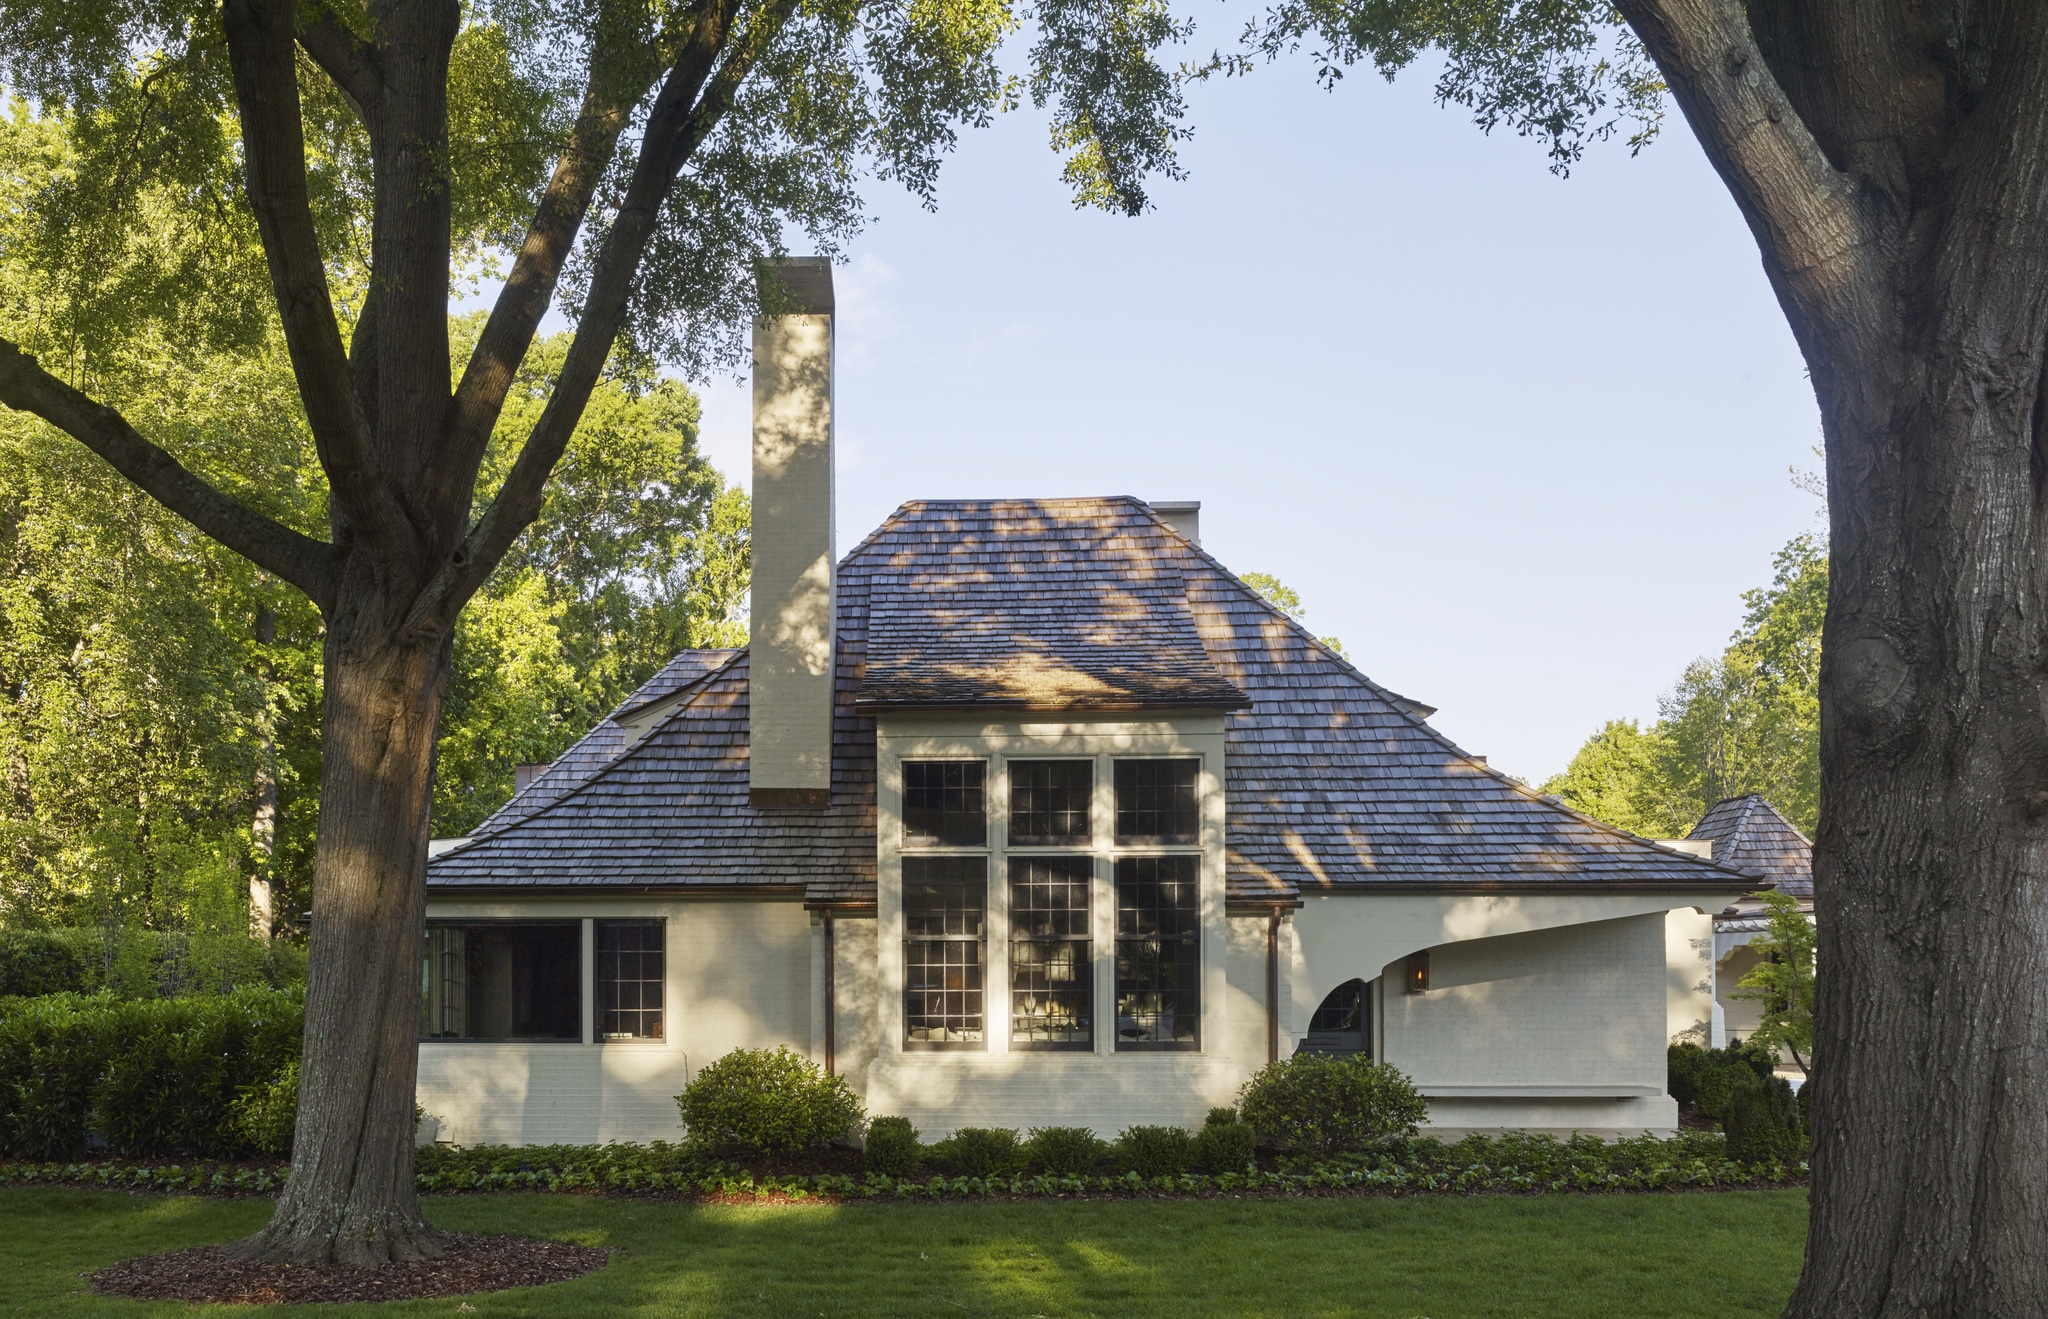  Finding Home: The Houses of Pursley DIxon | Chris Edwards Photography